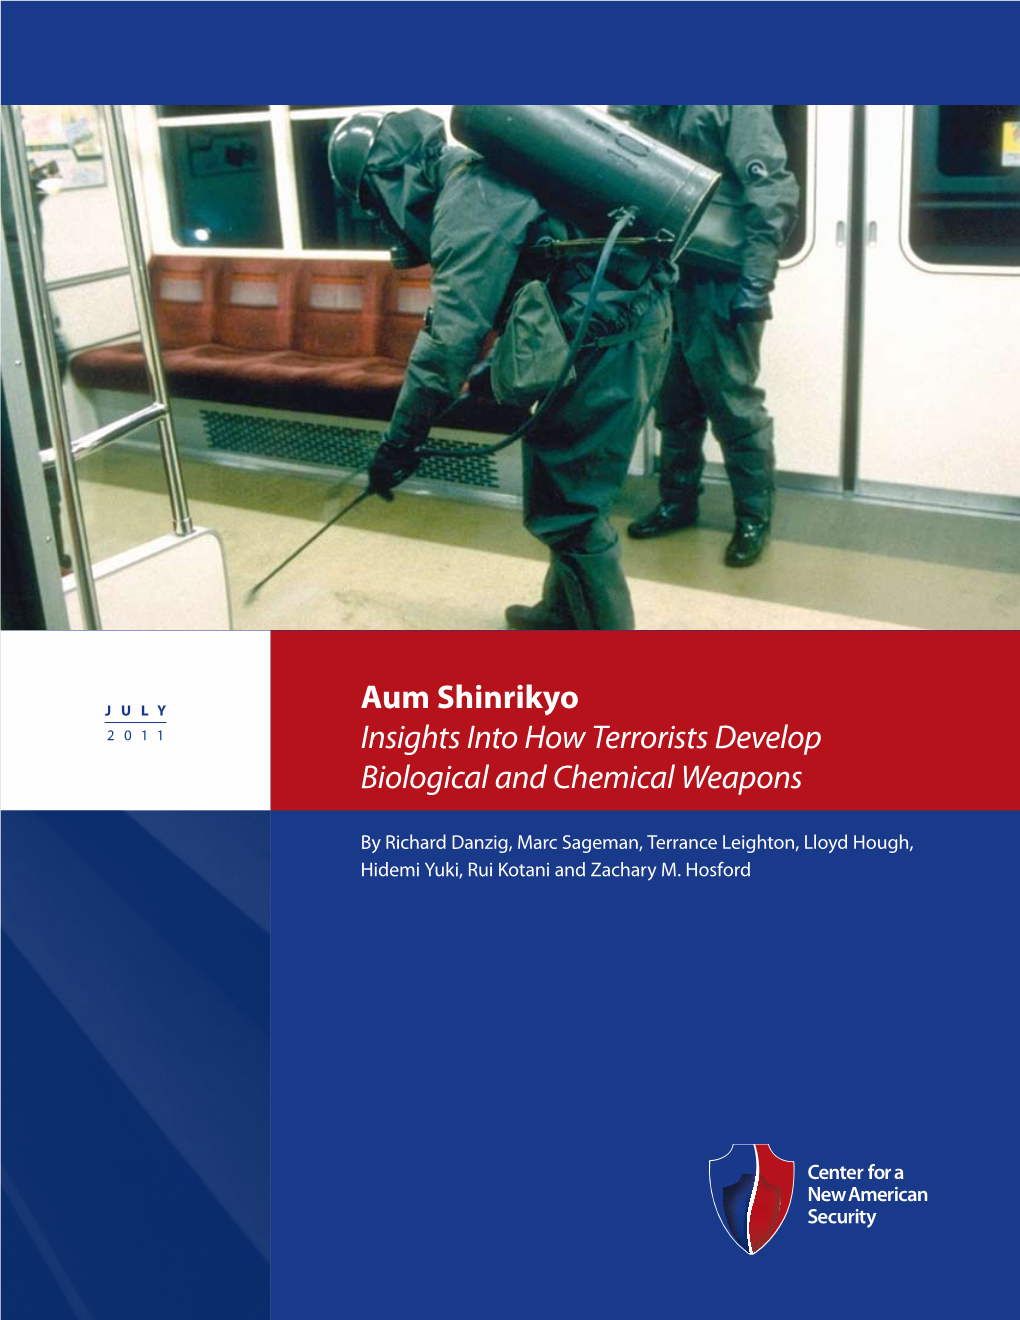 Aum Shinrikyo Insights Into How Terrorists Develop Biological and Chemical Weapons